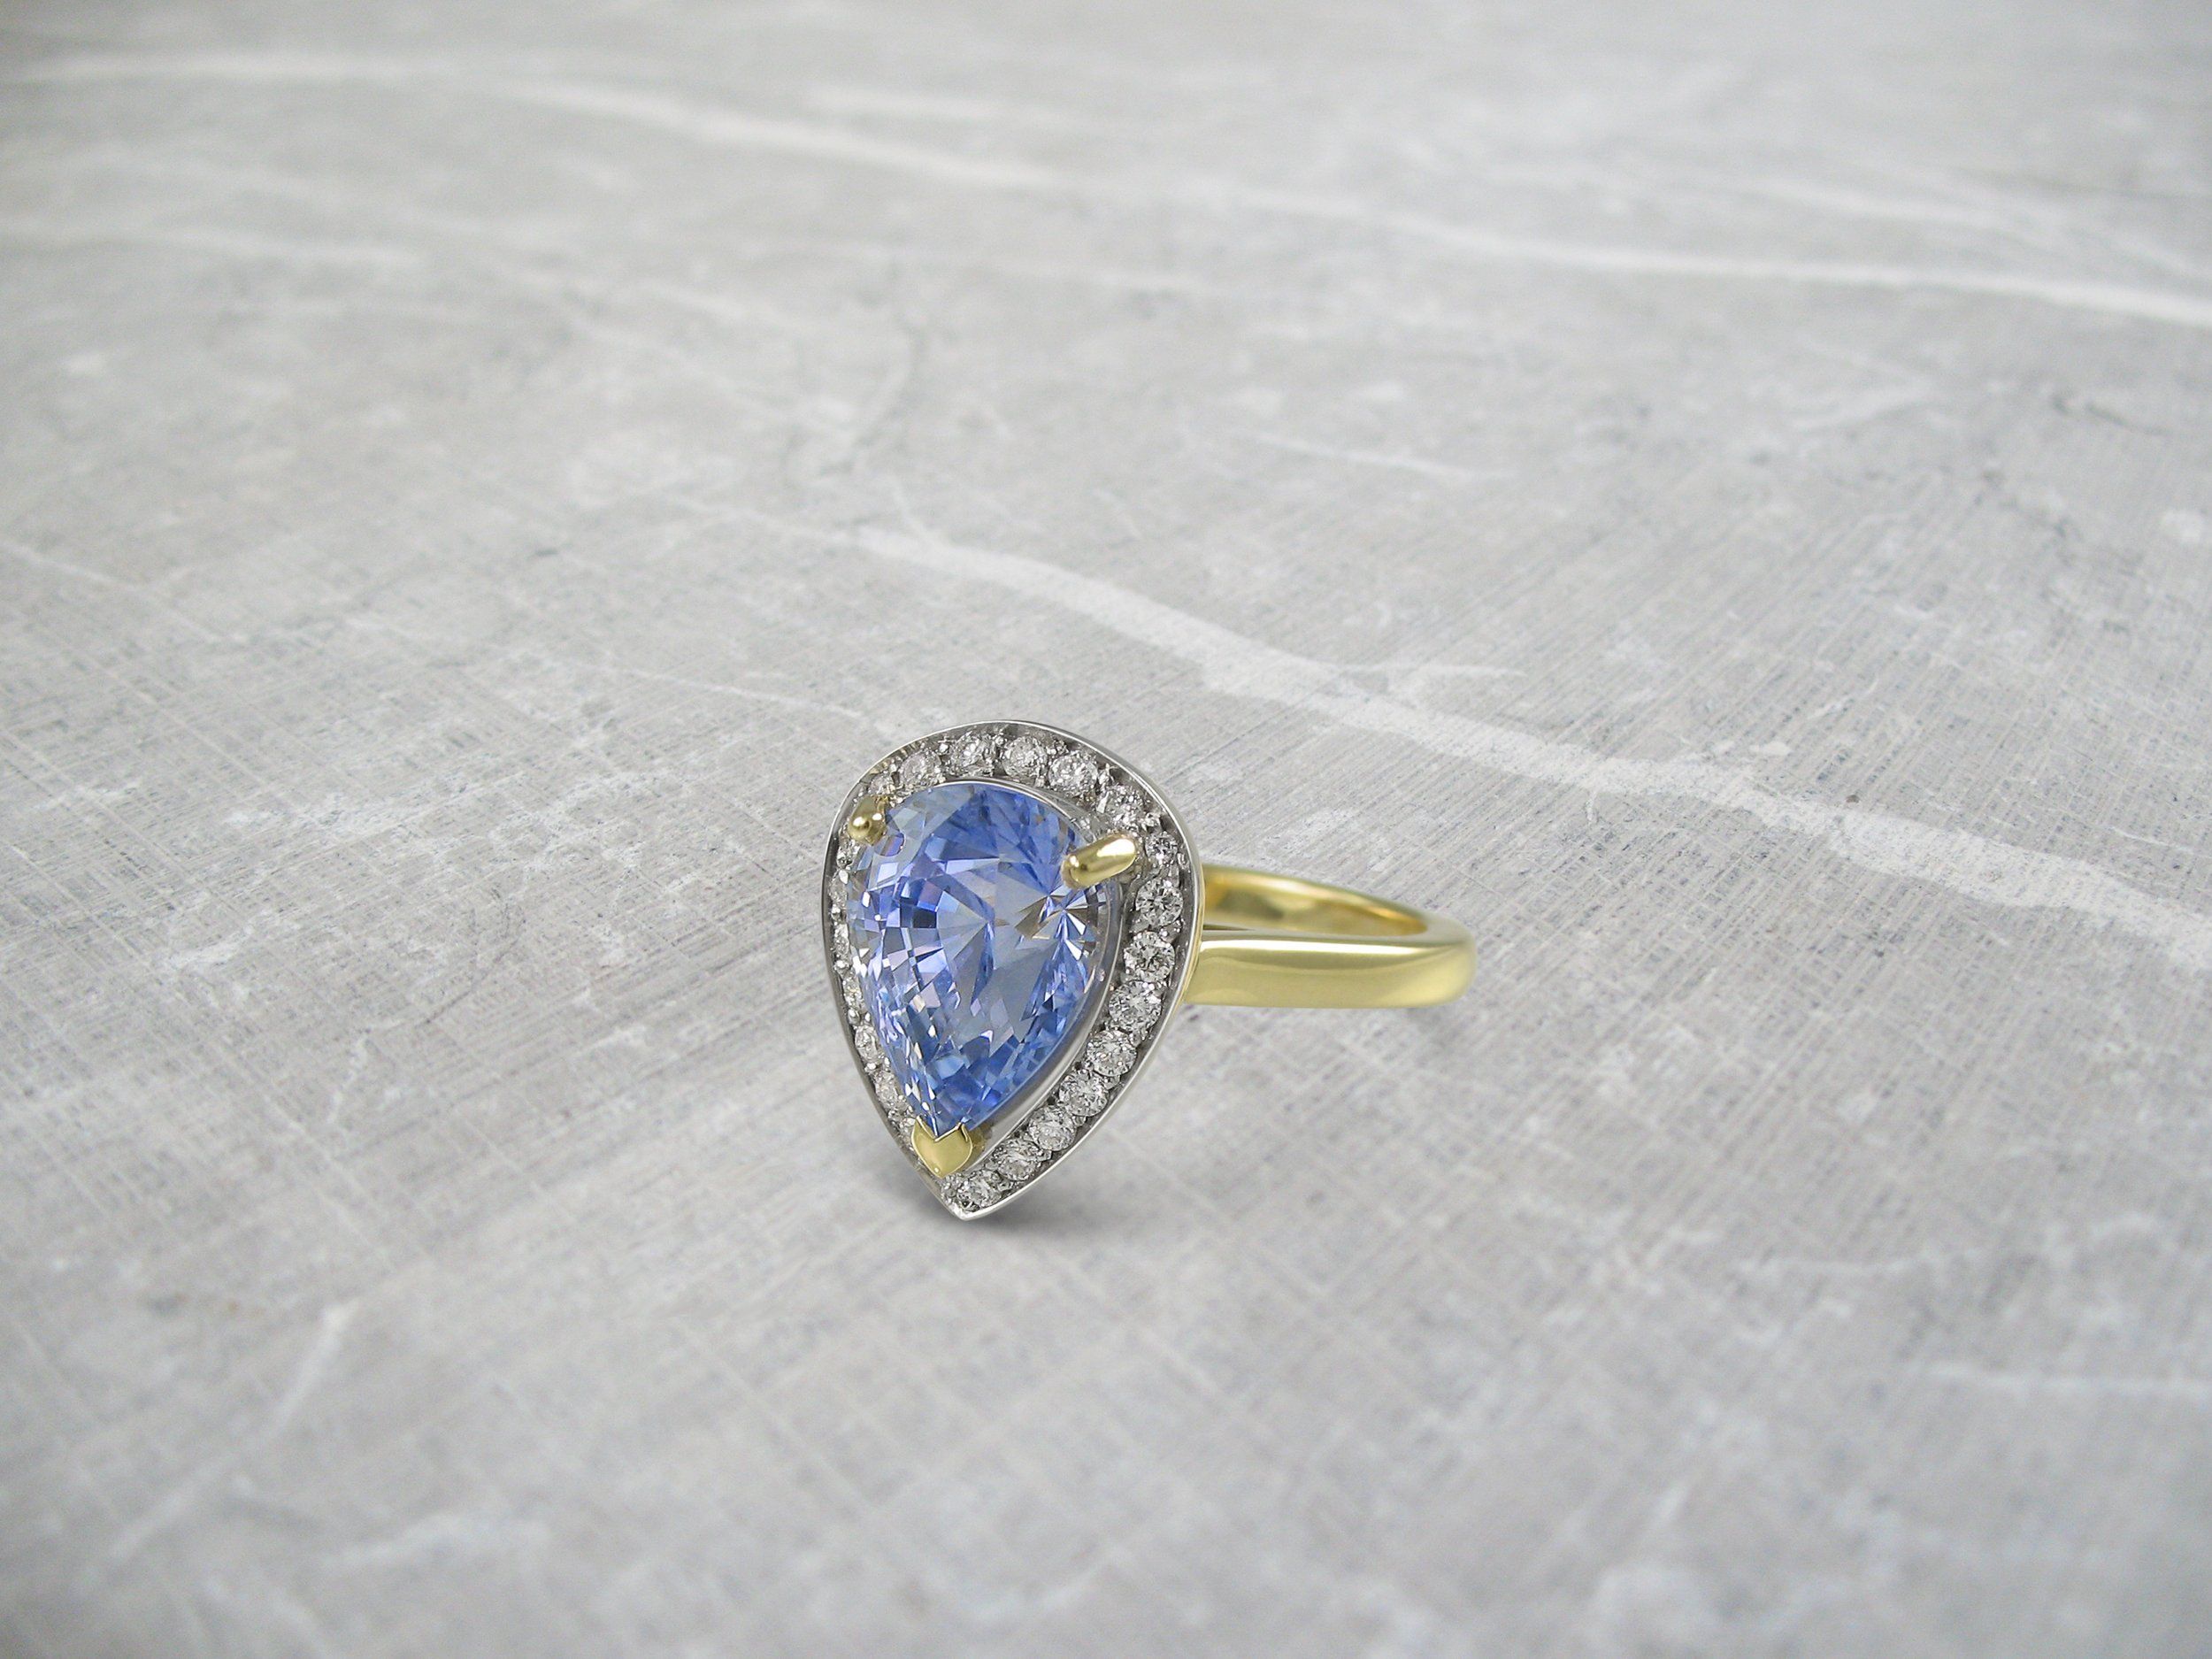 Sapphire Rings | Simon Wright | Bespoke Jewellery London Within Pear Shape Sapphire Halo Rings (View 22 of 25)